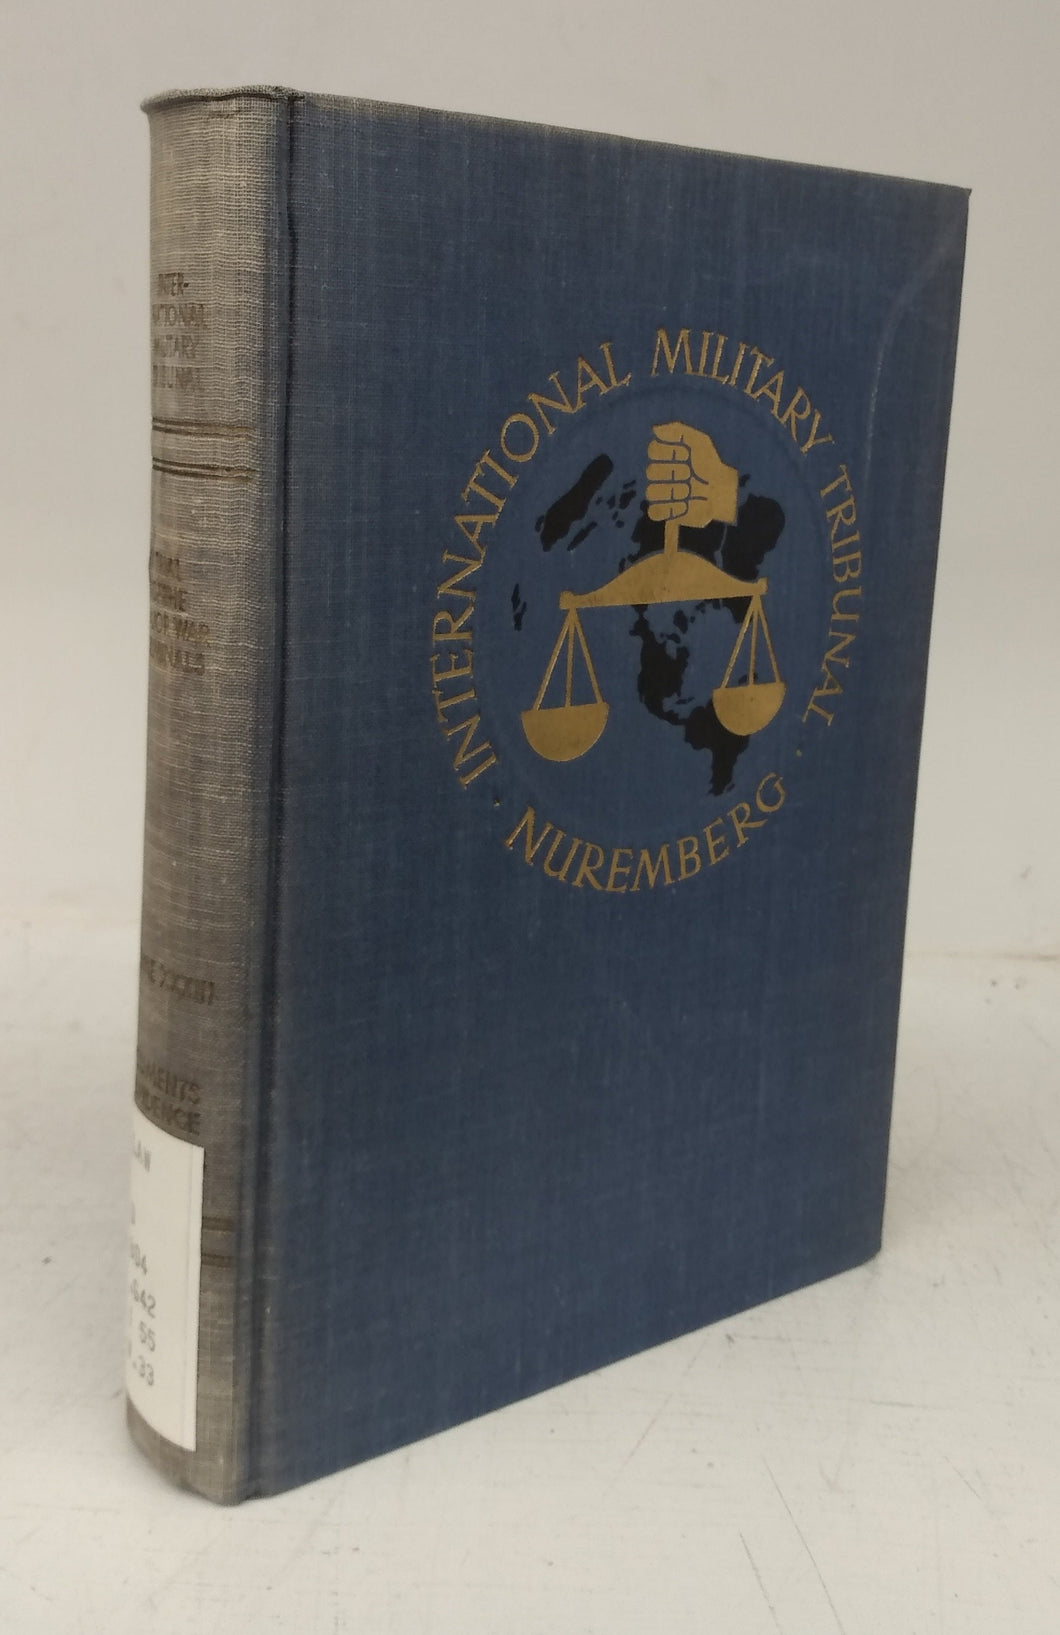 Trial of the Major War Criminals before the International Military Tribunal, Nuremberg, 14 November 1945 - 1 October 1946 (Volume XXXIII - Documents and Other Material in Evidence Nos 3729  - PS to 3993 - PS)